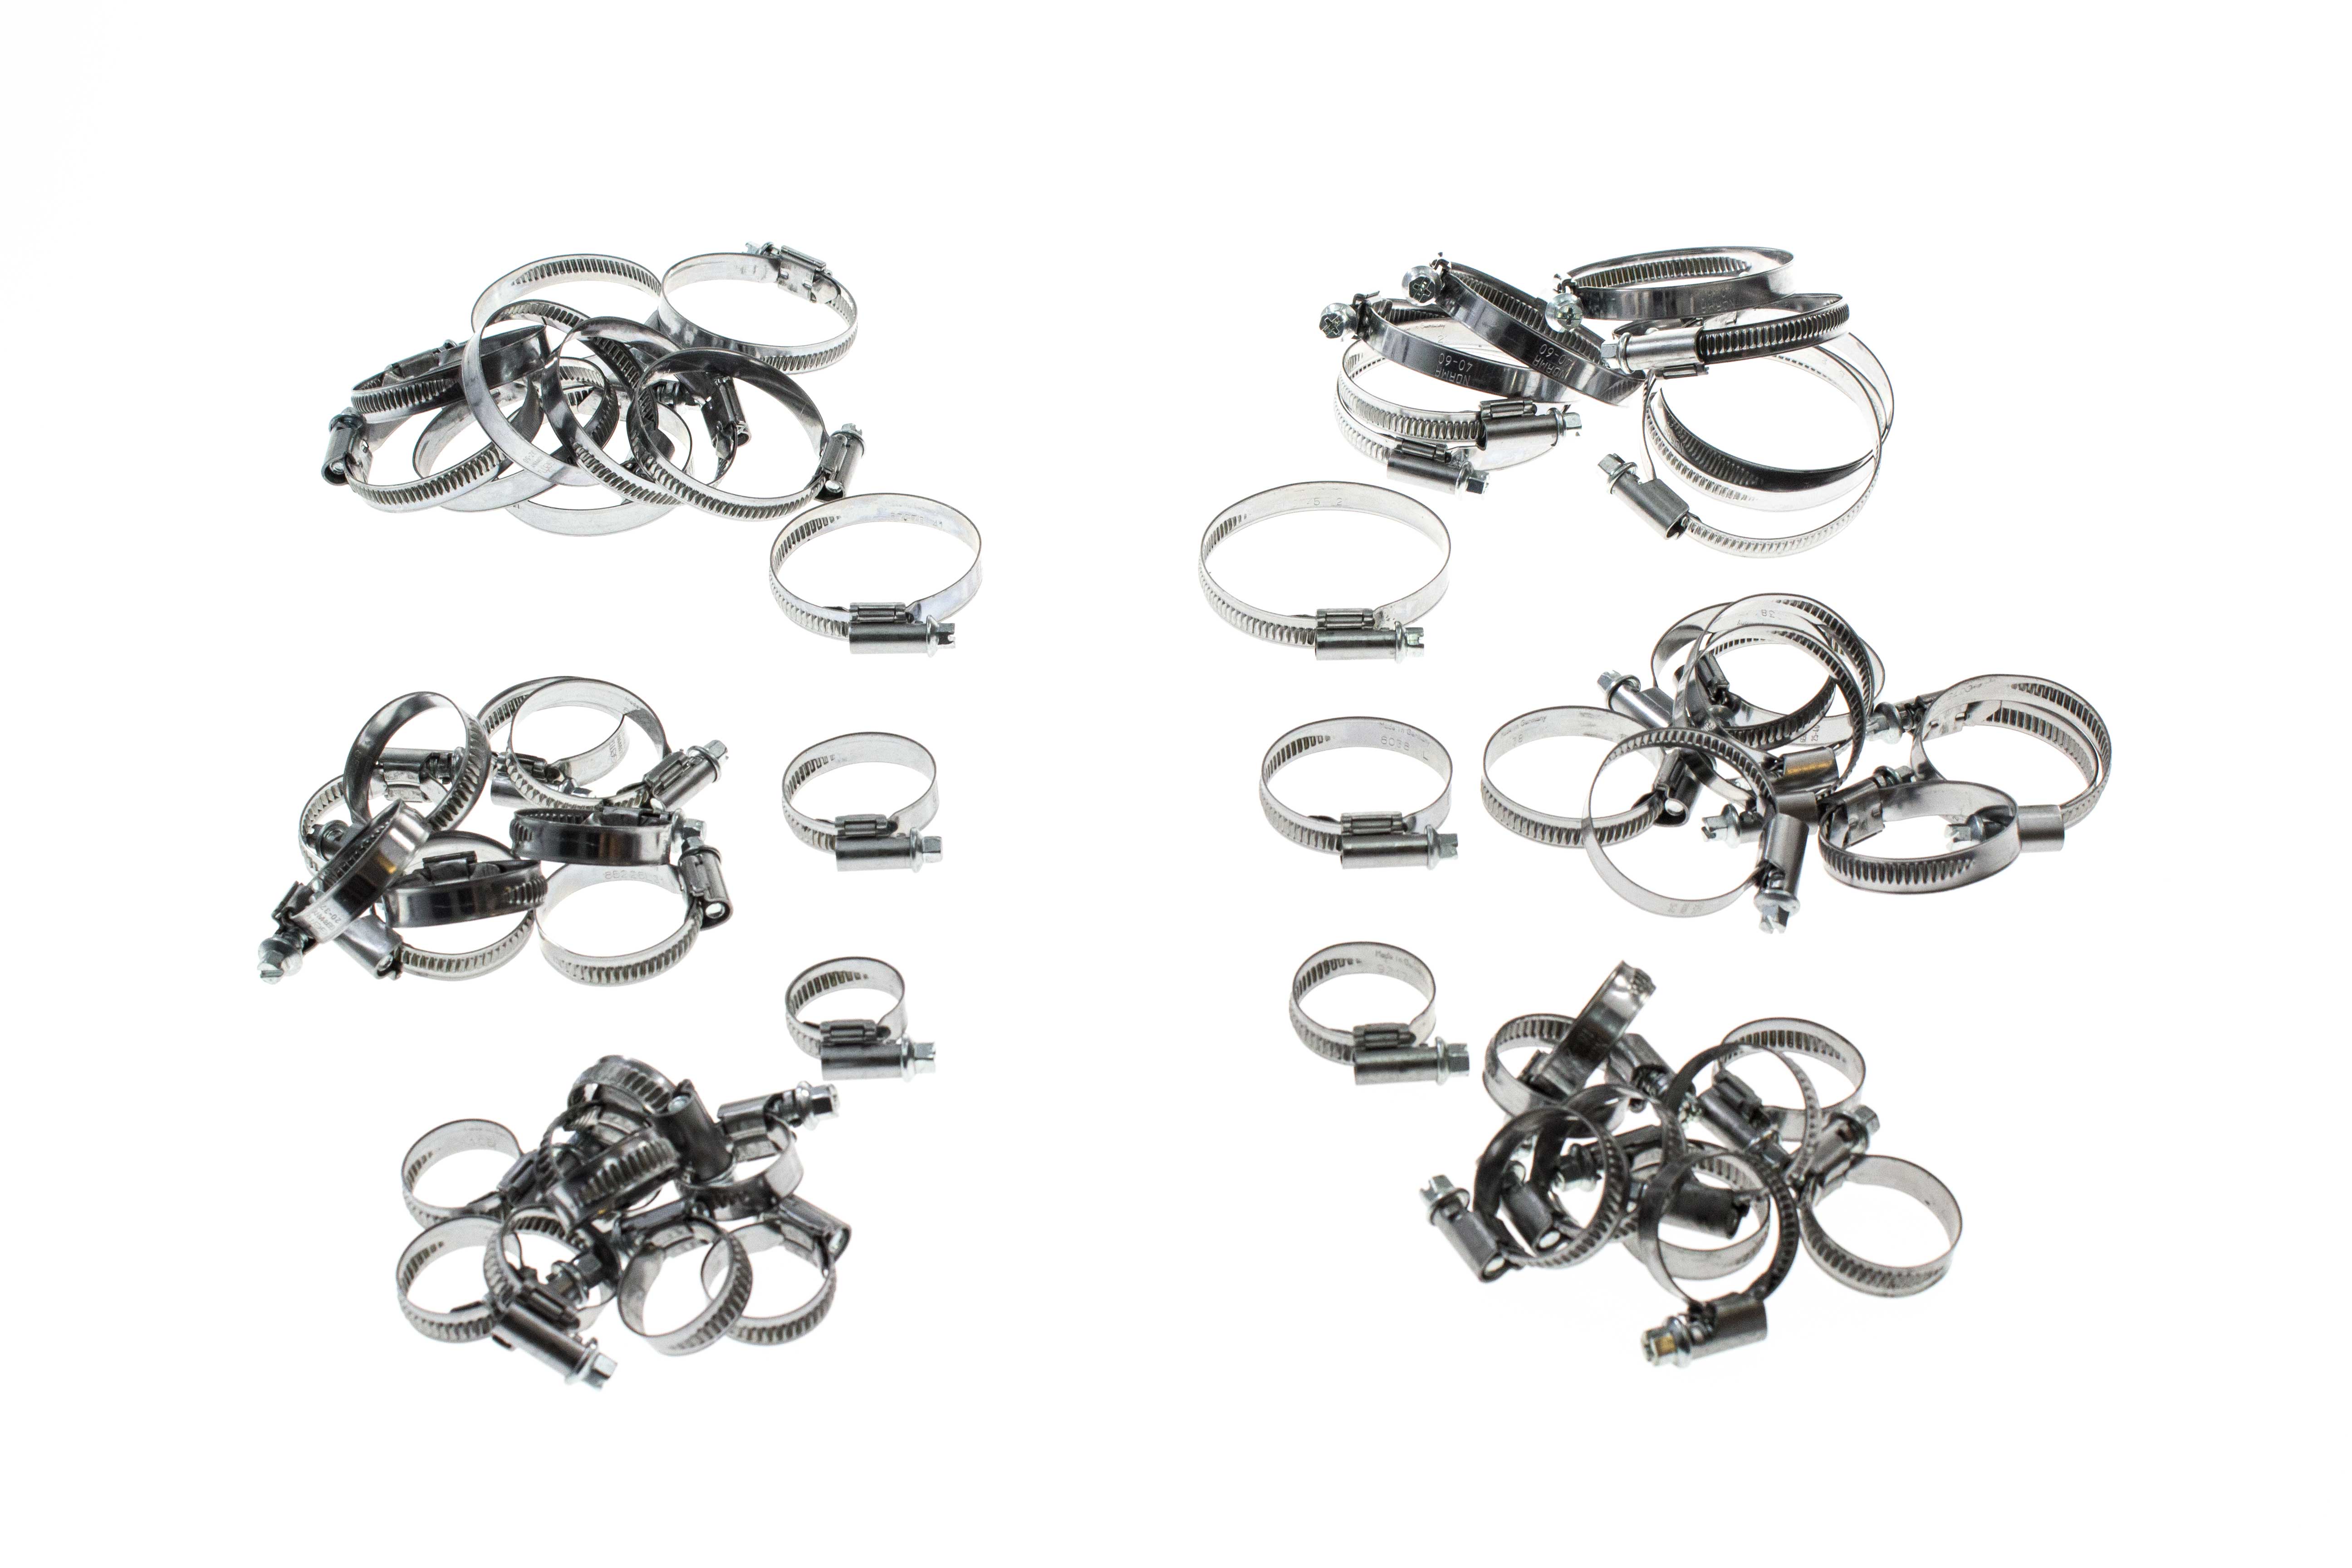 AAZ Preferred HOSECLAMPKIT Hose Clamp; Variety 6 Sizes, 10 Pack Each; Kit